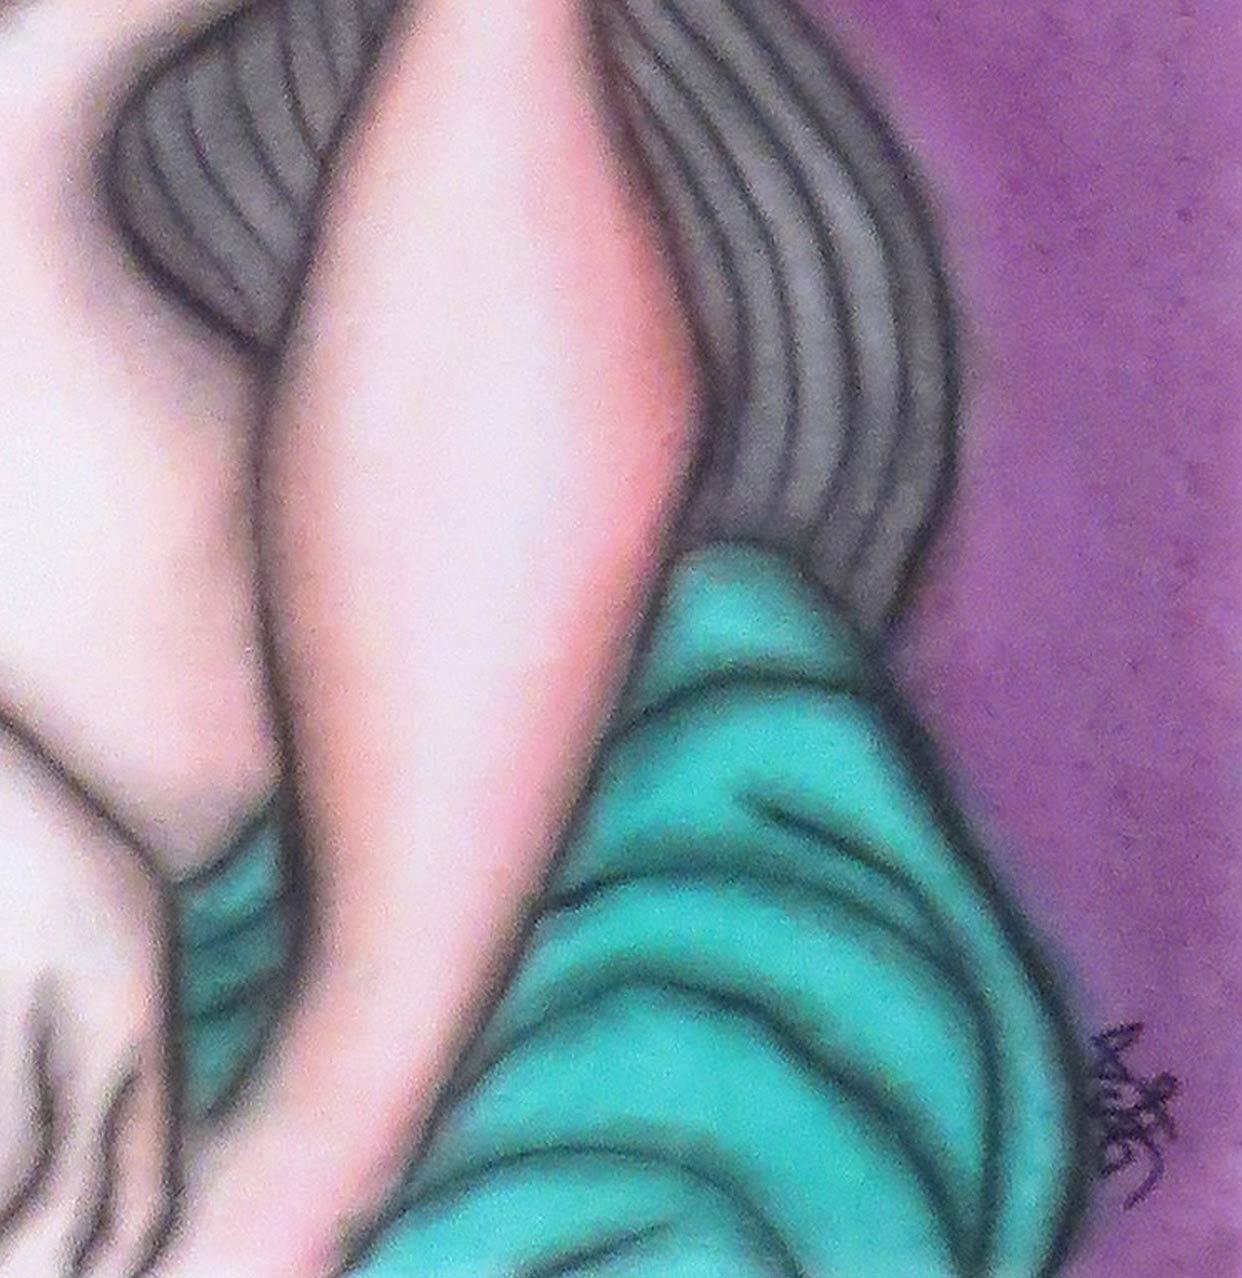 Indian Nude Woman in Green Saree, Pastel on Board, Master Indian Artist